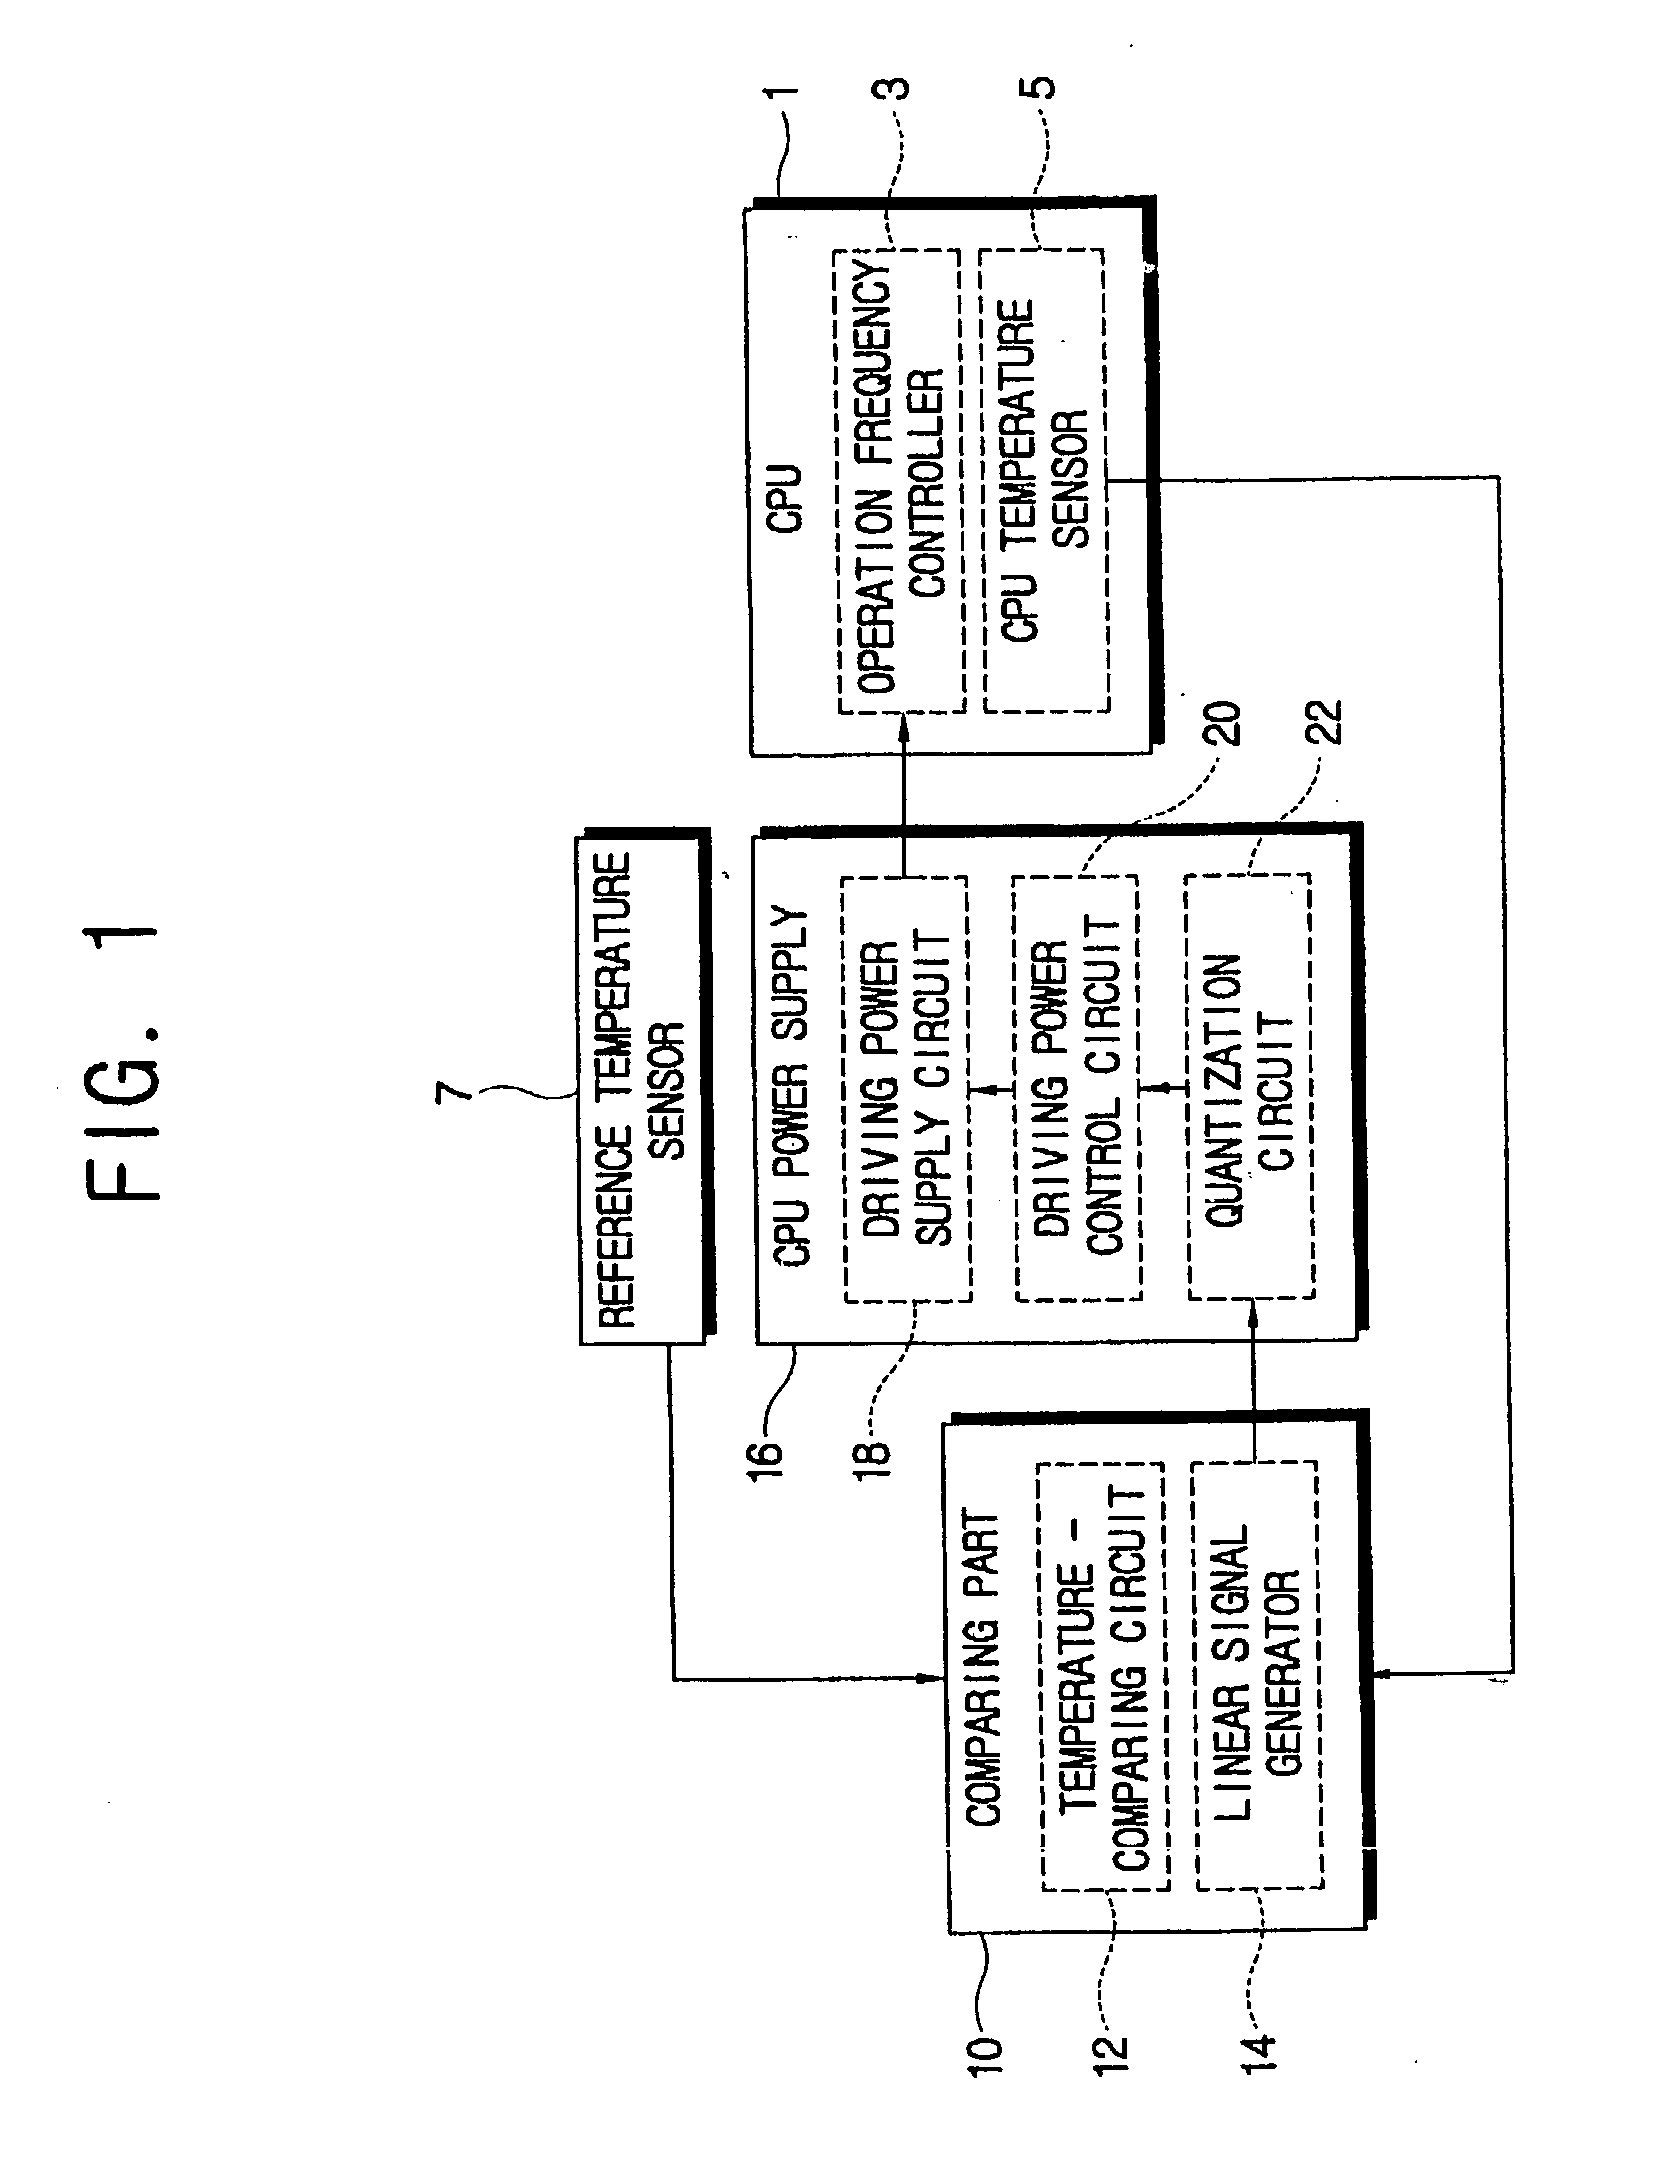 System, controller, software and method for protecting against overheating of a CPU